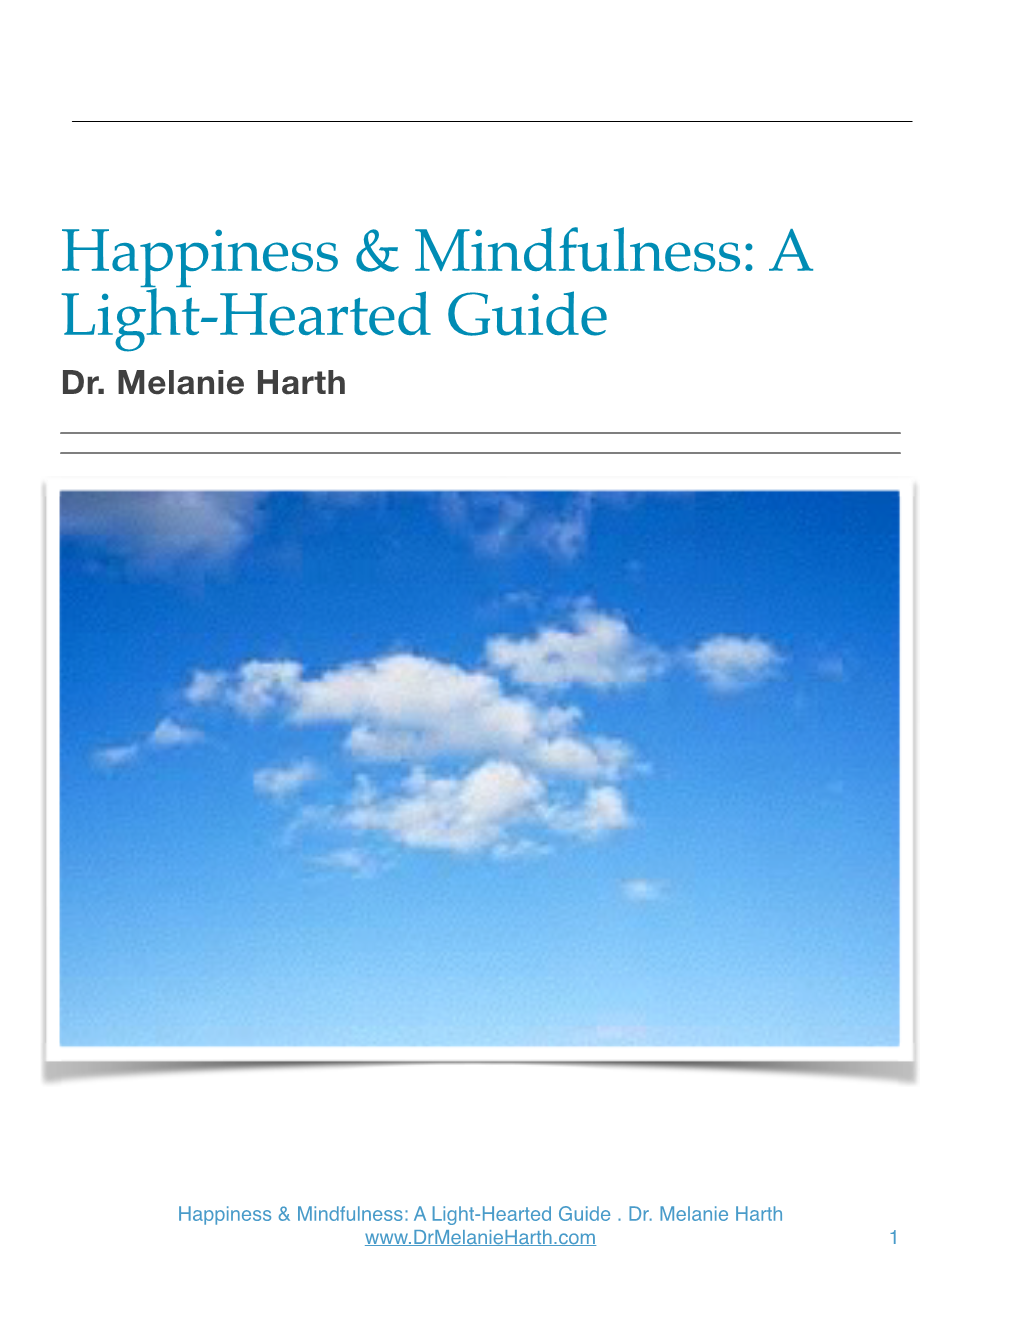 Happiness & Mindfulness/A Light-Hearted Guide